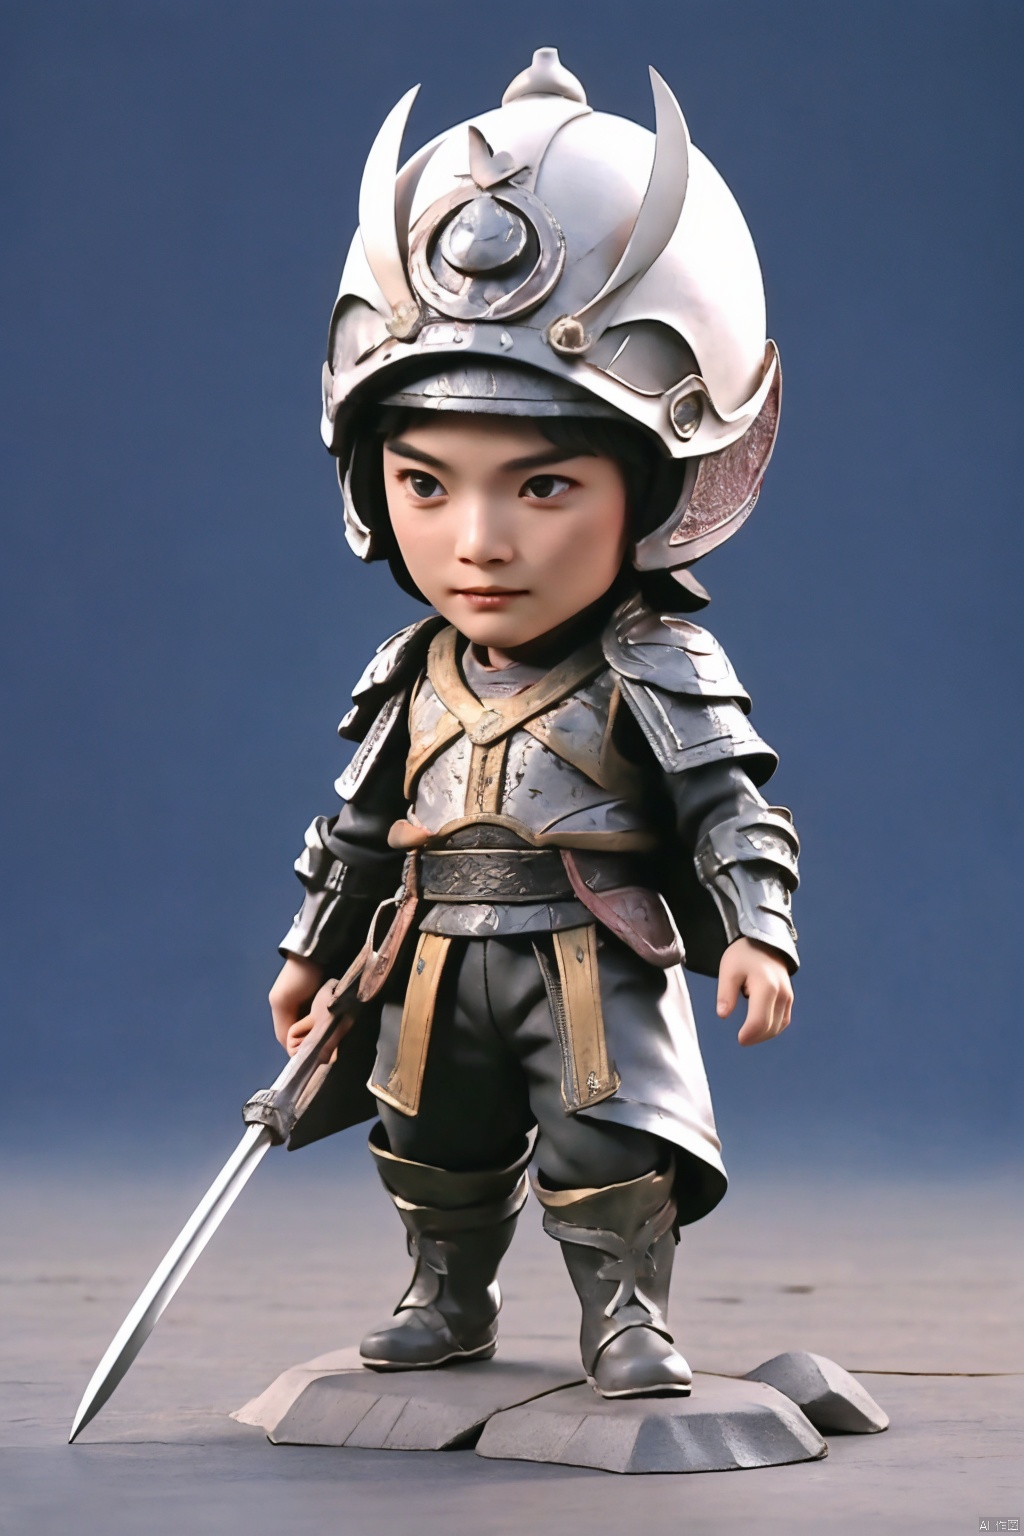  1boy 40years old Chineseclothing,Background of ancient battlefields ray tracing White armor A long white cloak  holding a lonWg spear Silver helmet, hand101